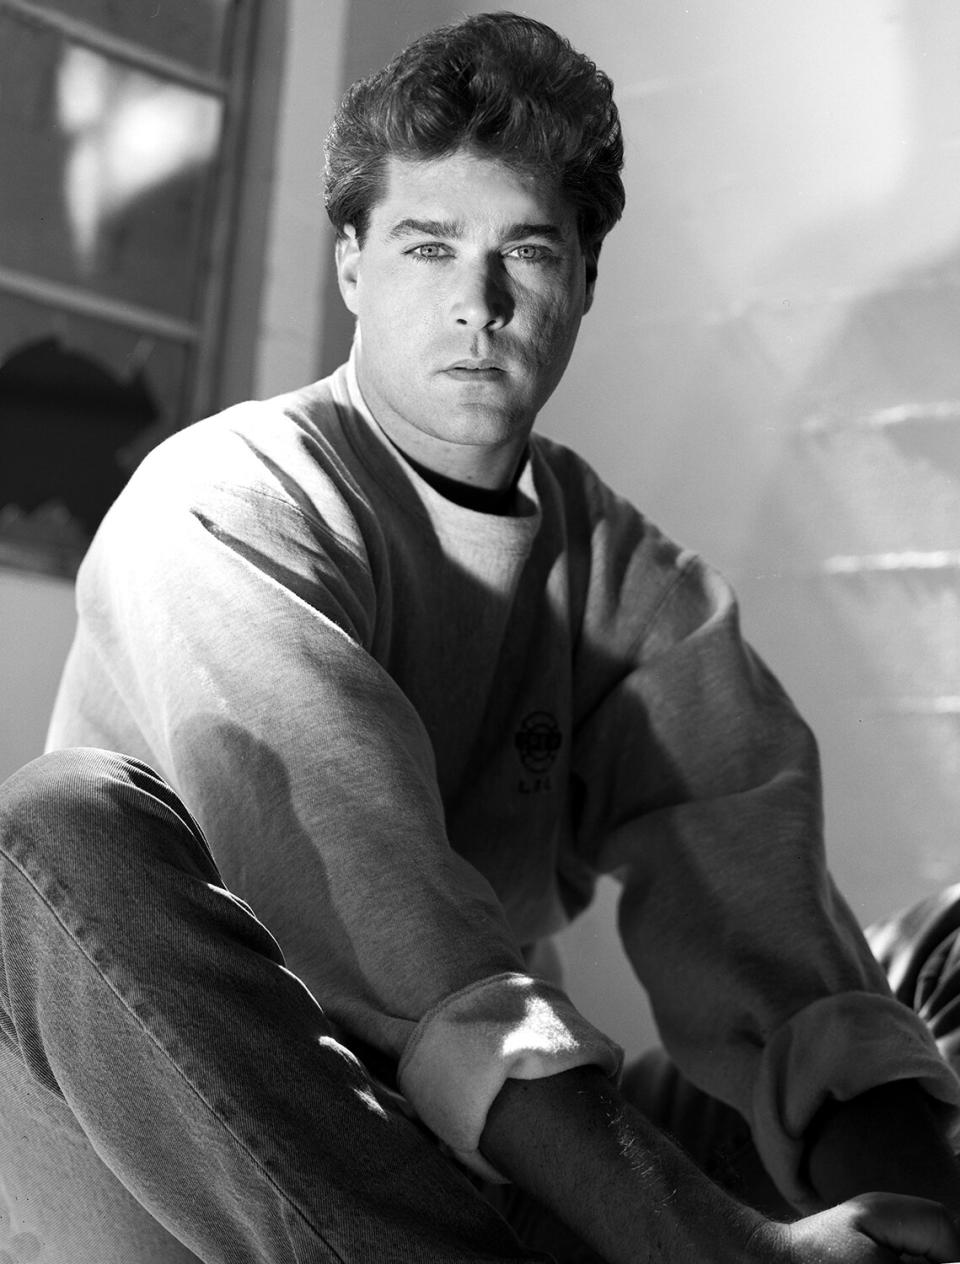 Actor Ray Liotta poses for a portrait in October 1990 in Los Angeles, California.